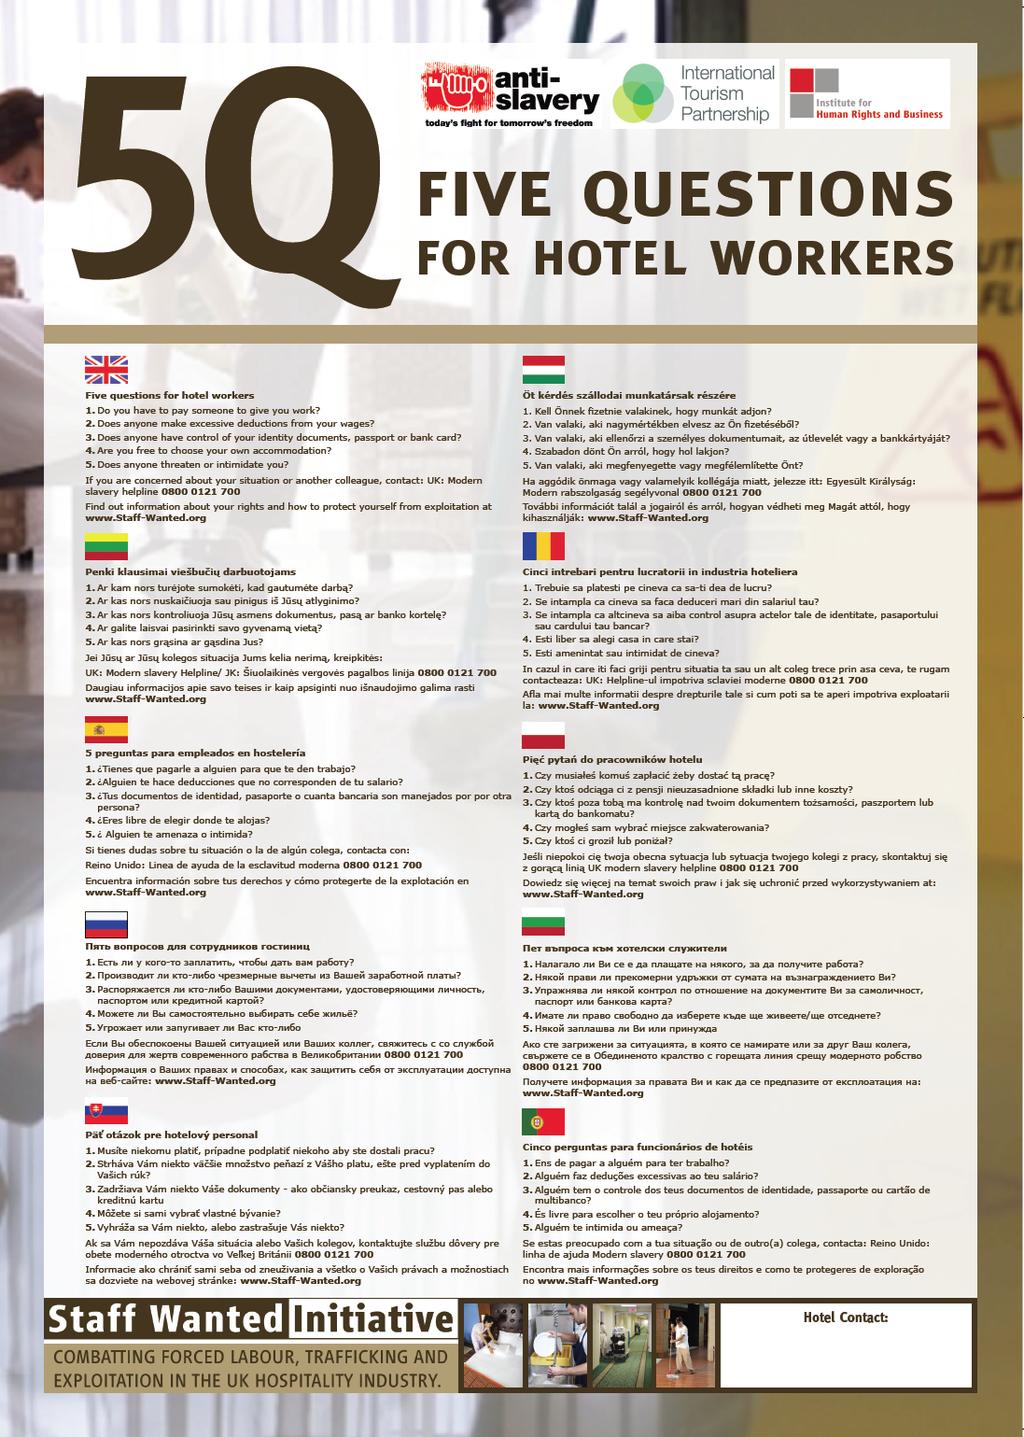 ITP and the Staff Wanted Initiative produced this poster to be displayed in hotel staff rooms.